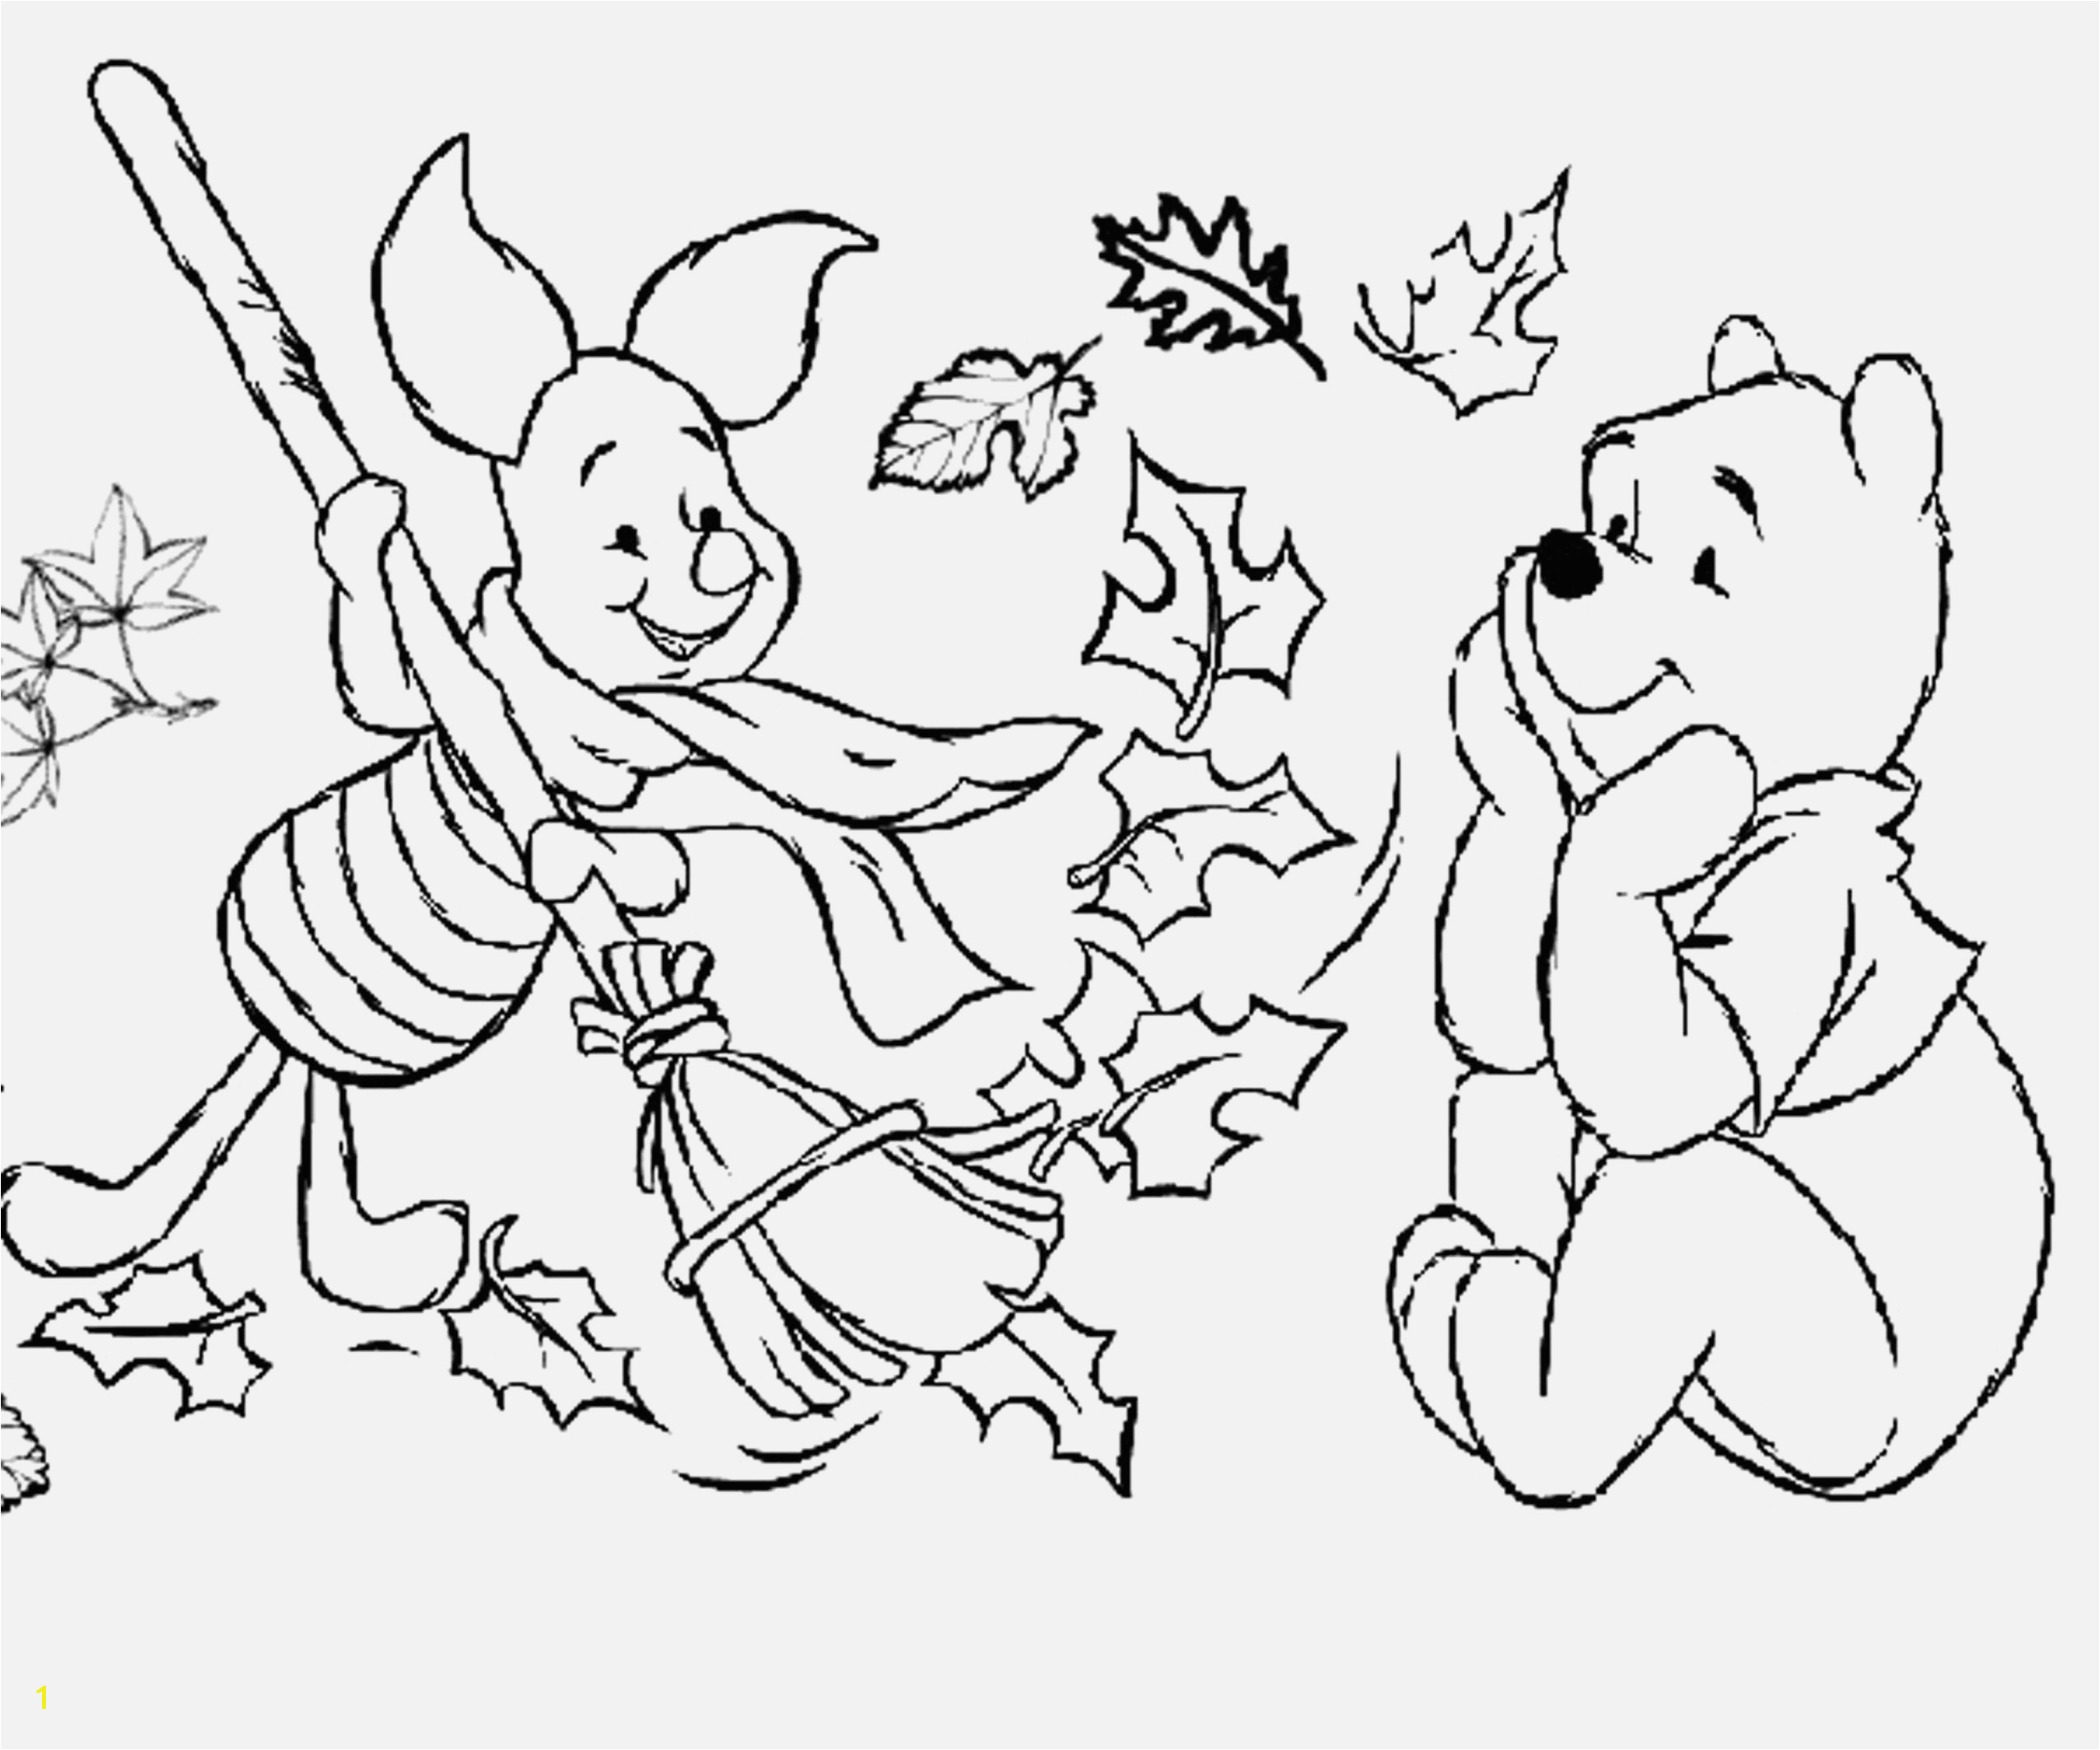 Free Printable Preschool Coloring Pages Easy Adult Coloring Pages Free Print Simple Adult Coloring Pages